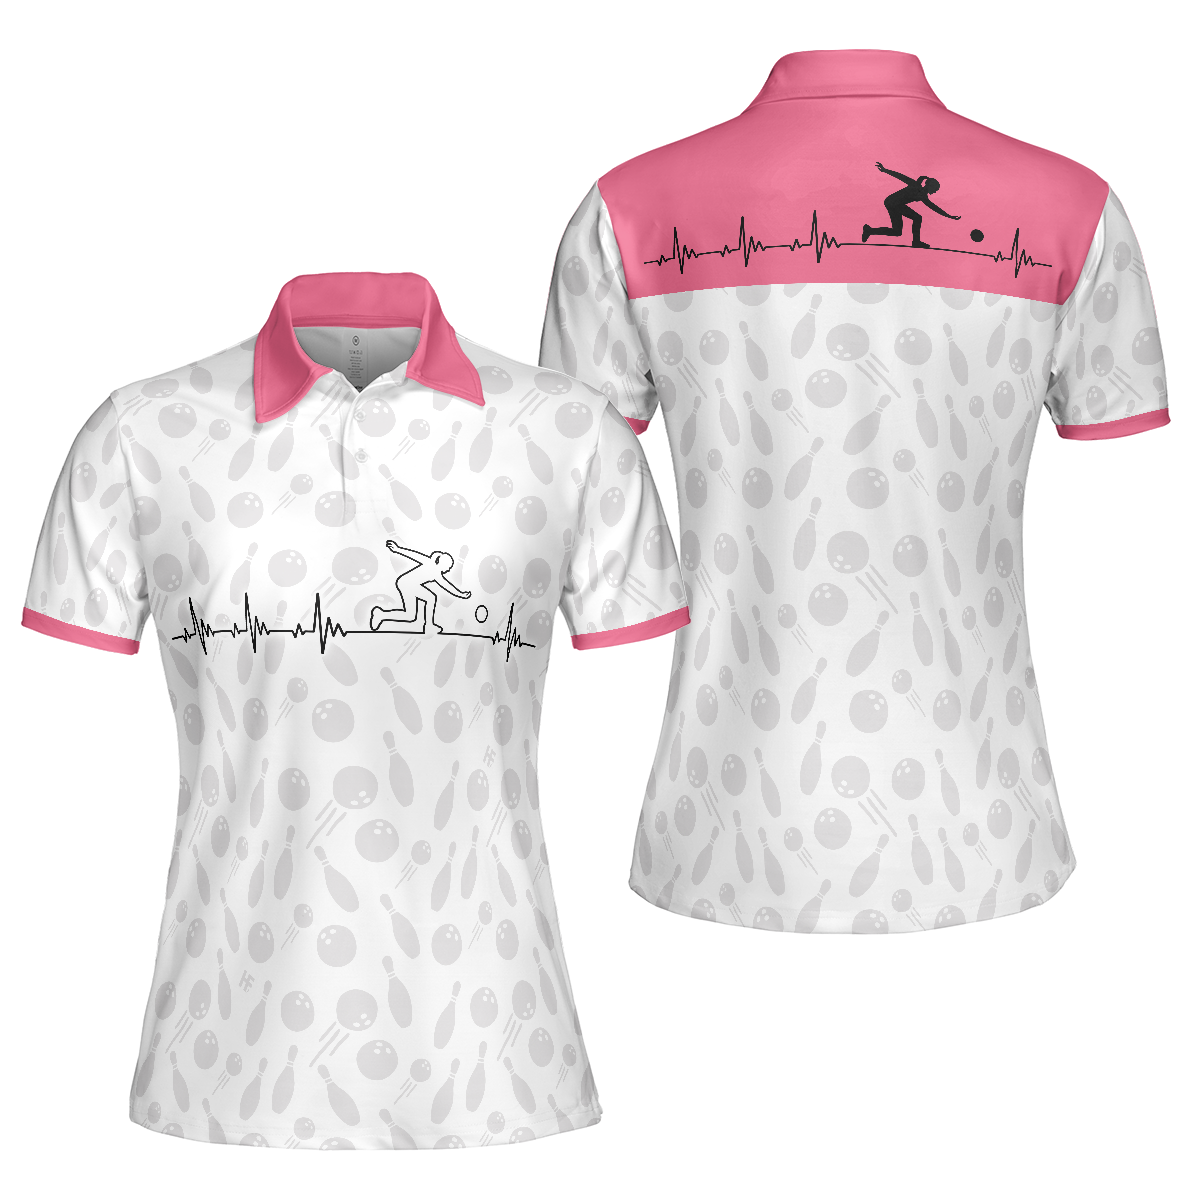 Bowling Is My Heart Bowling Short Sleeve Women Polo Shirt, Bowling Balls And Pins Pattern Polo Shirt For Ladies